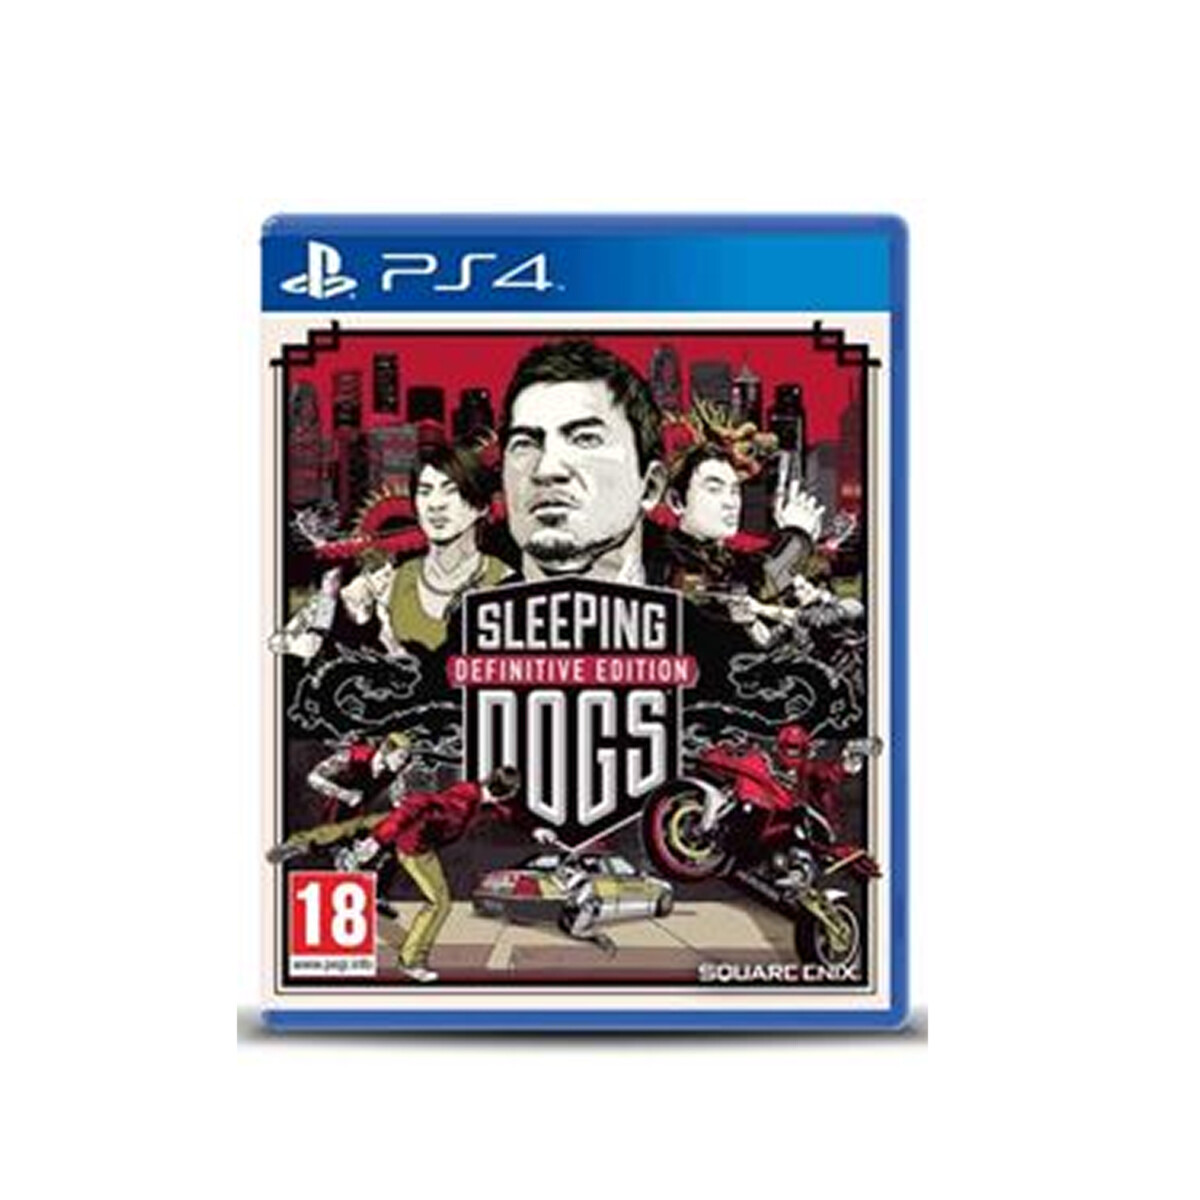 PS4 Sleeping Dogs Definitive Edition 